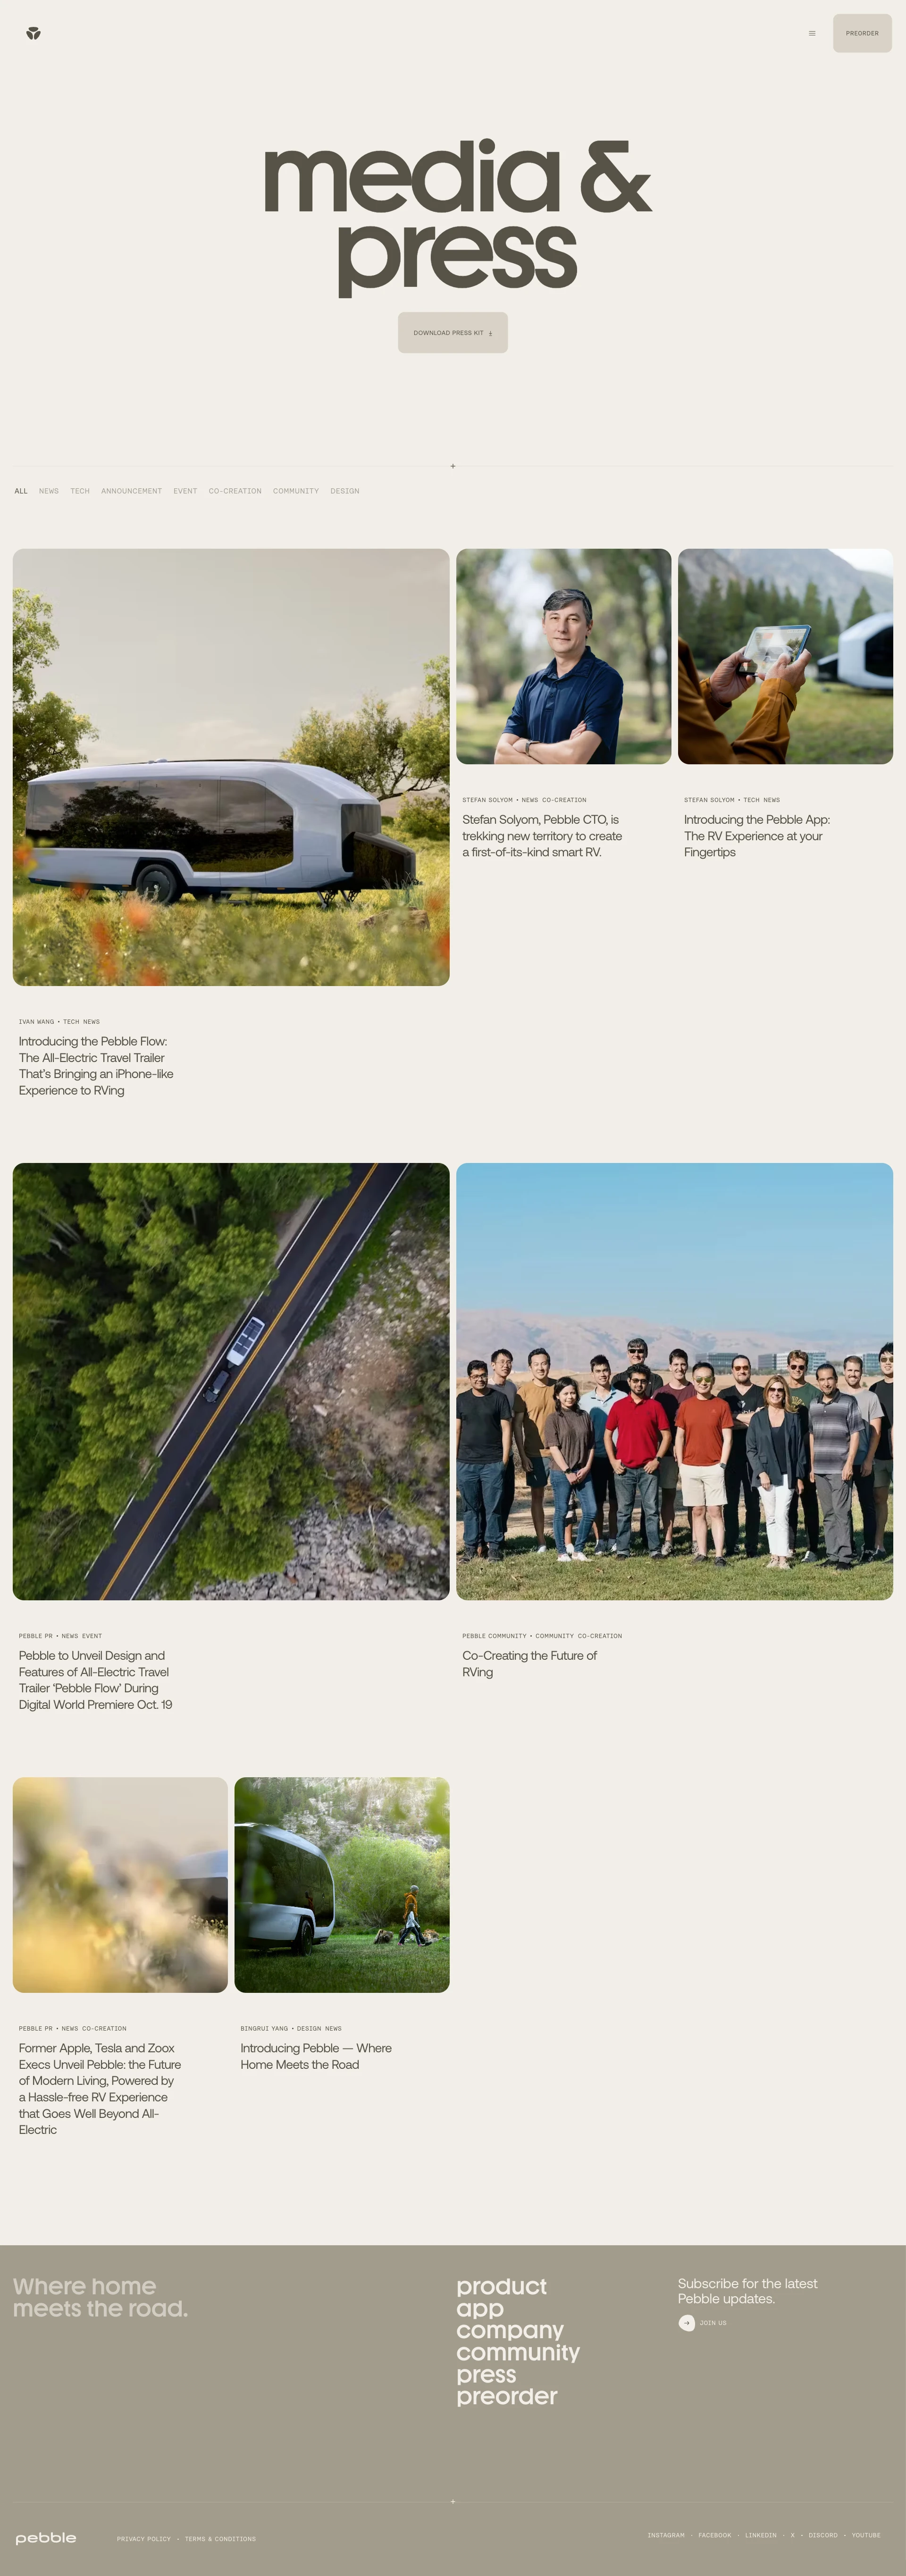 Pebble Landing Page Example: Defining a new way to work, live and explore from anywhere with the Pebble Flow, an all-electric travel trailer that’s bringing an iPhone-like experience to RVing.